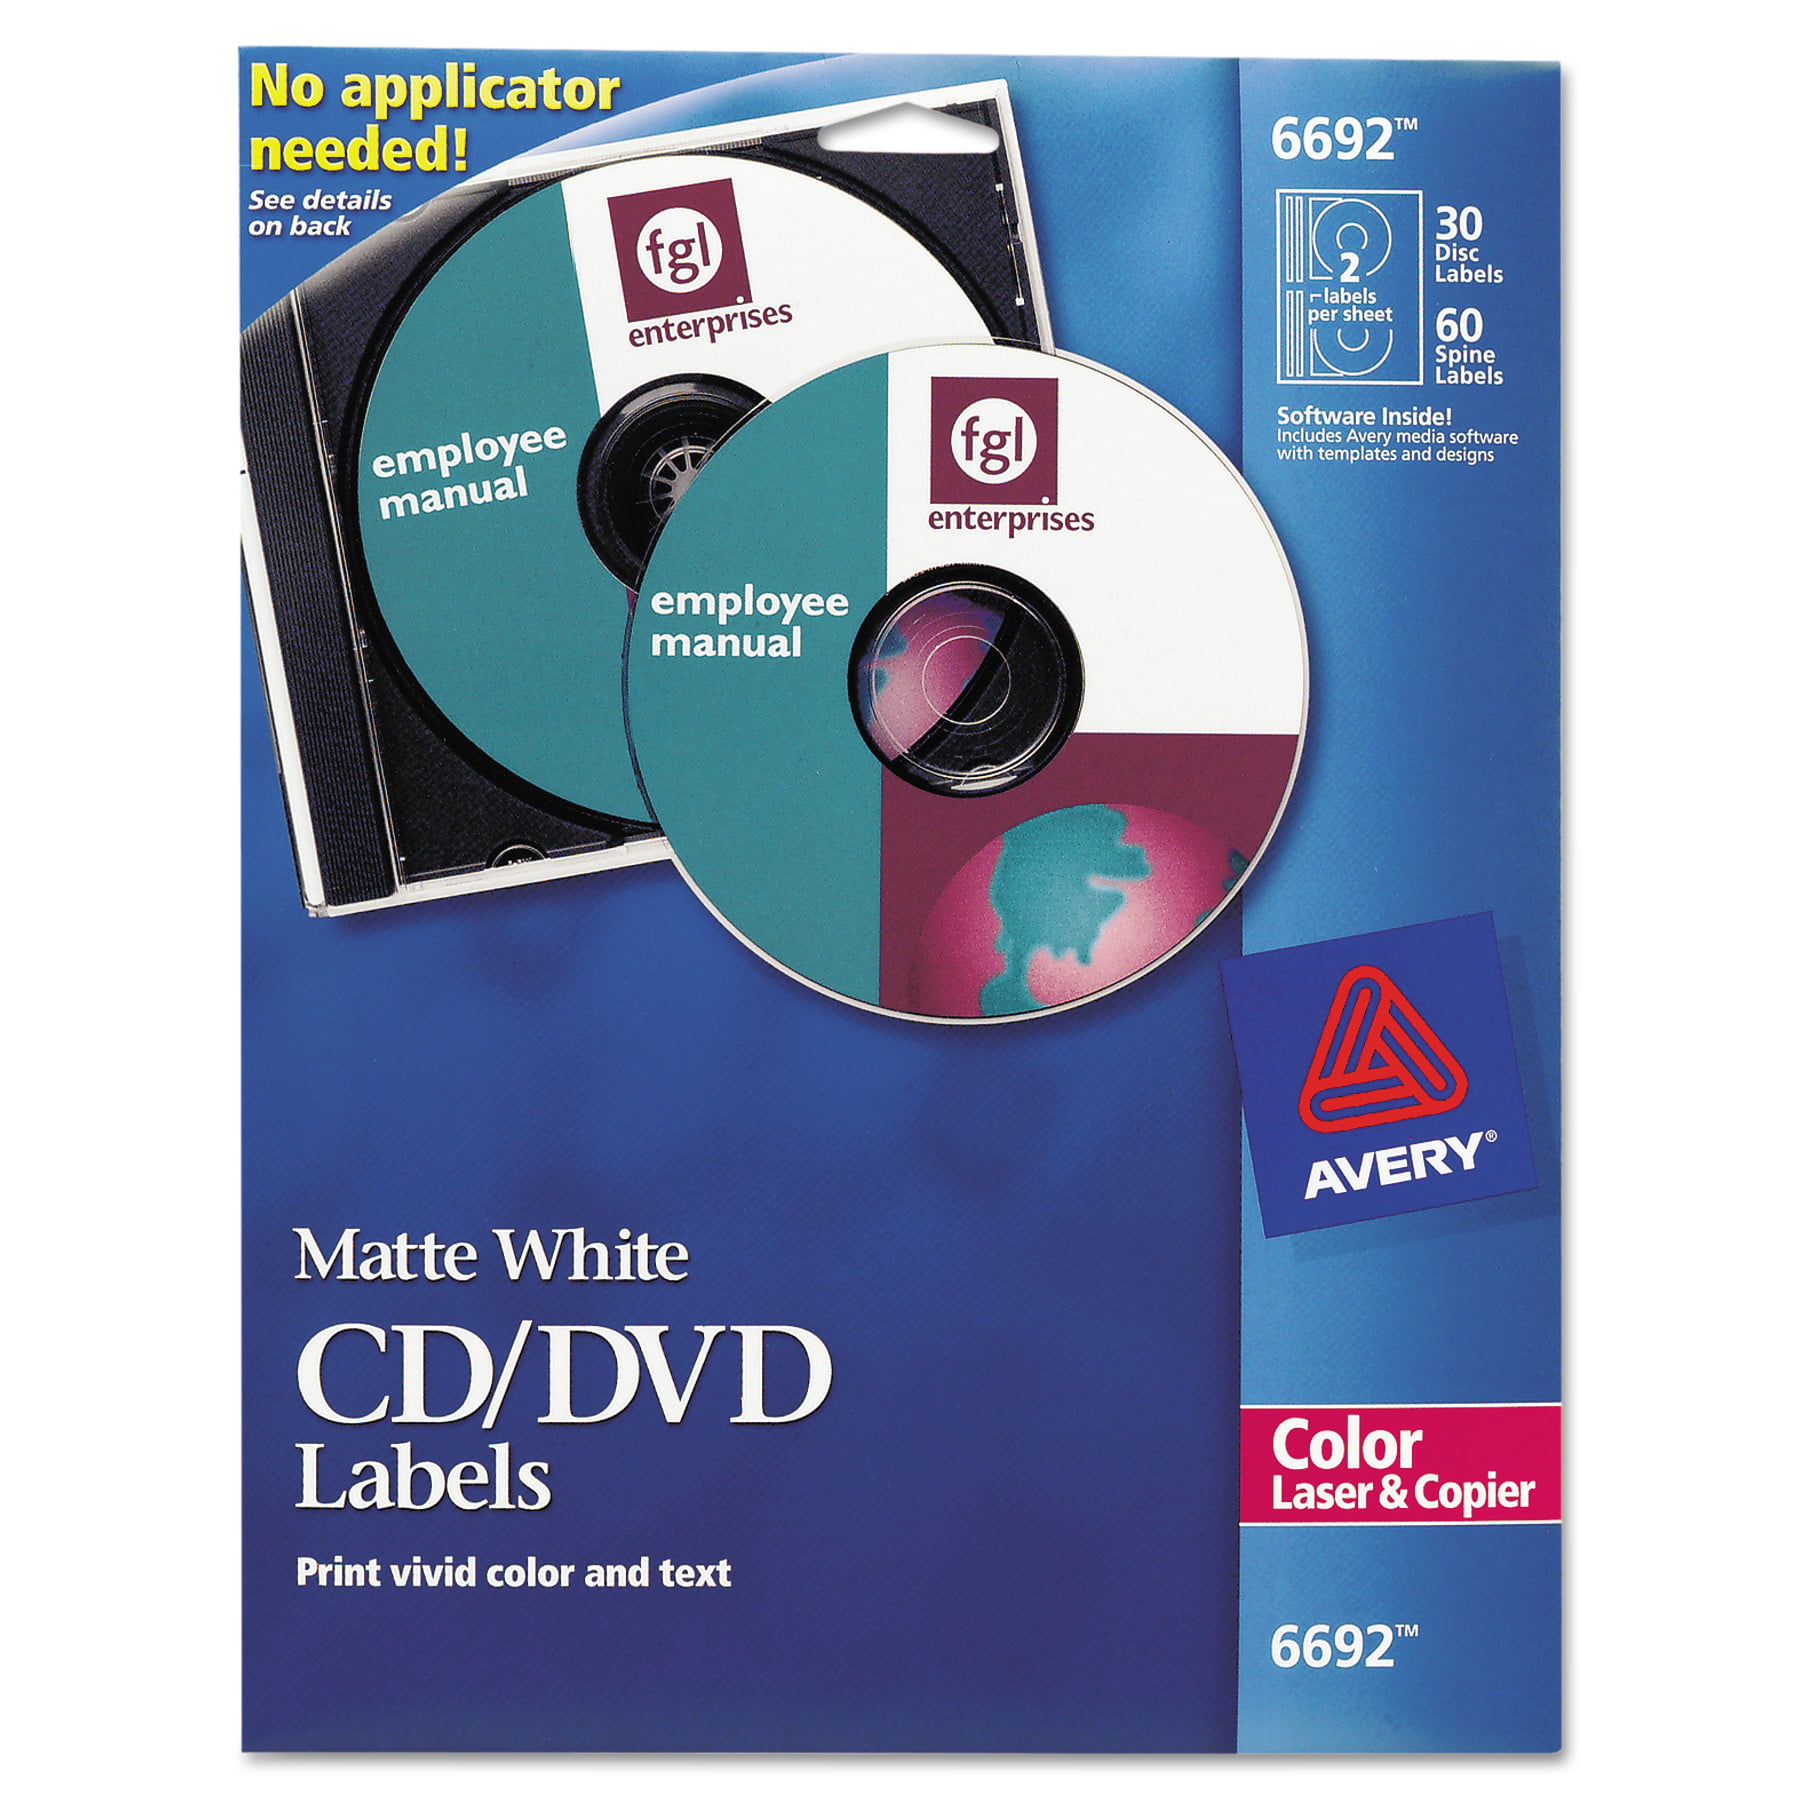 avery8931 cd labels software free download